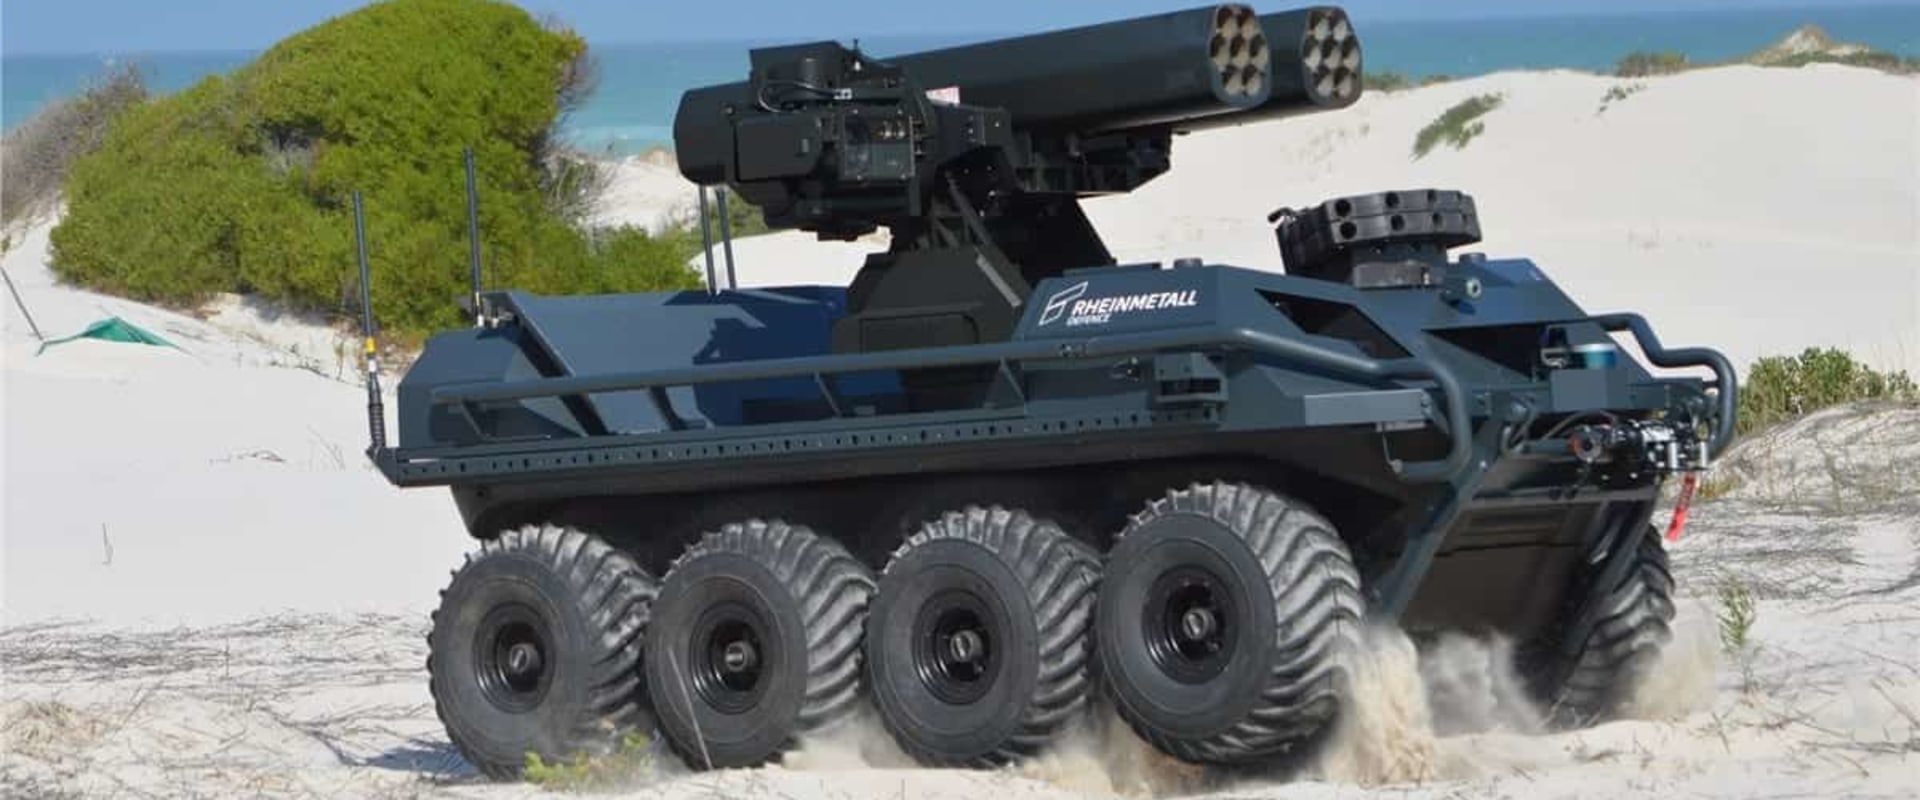 The Best Unmanned Combat Ground Vehicles (UCGVs)